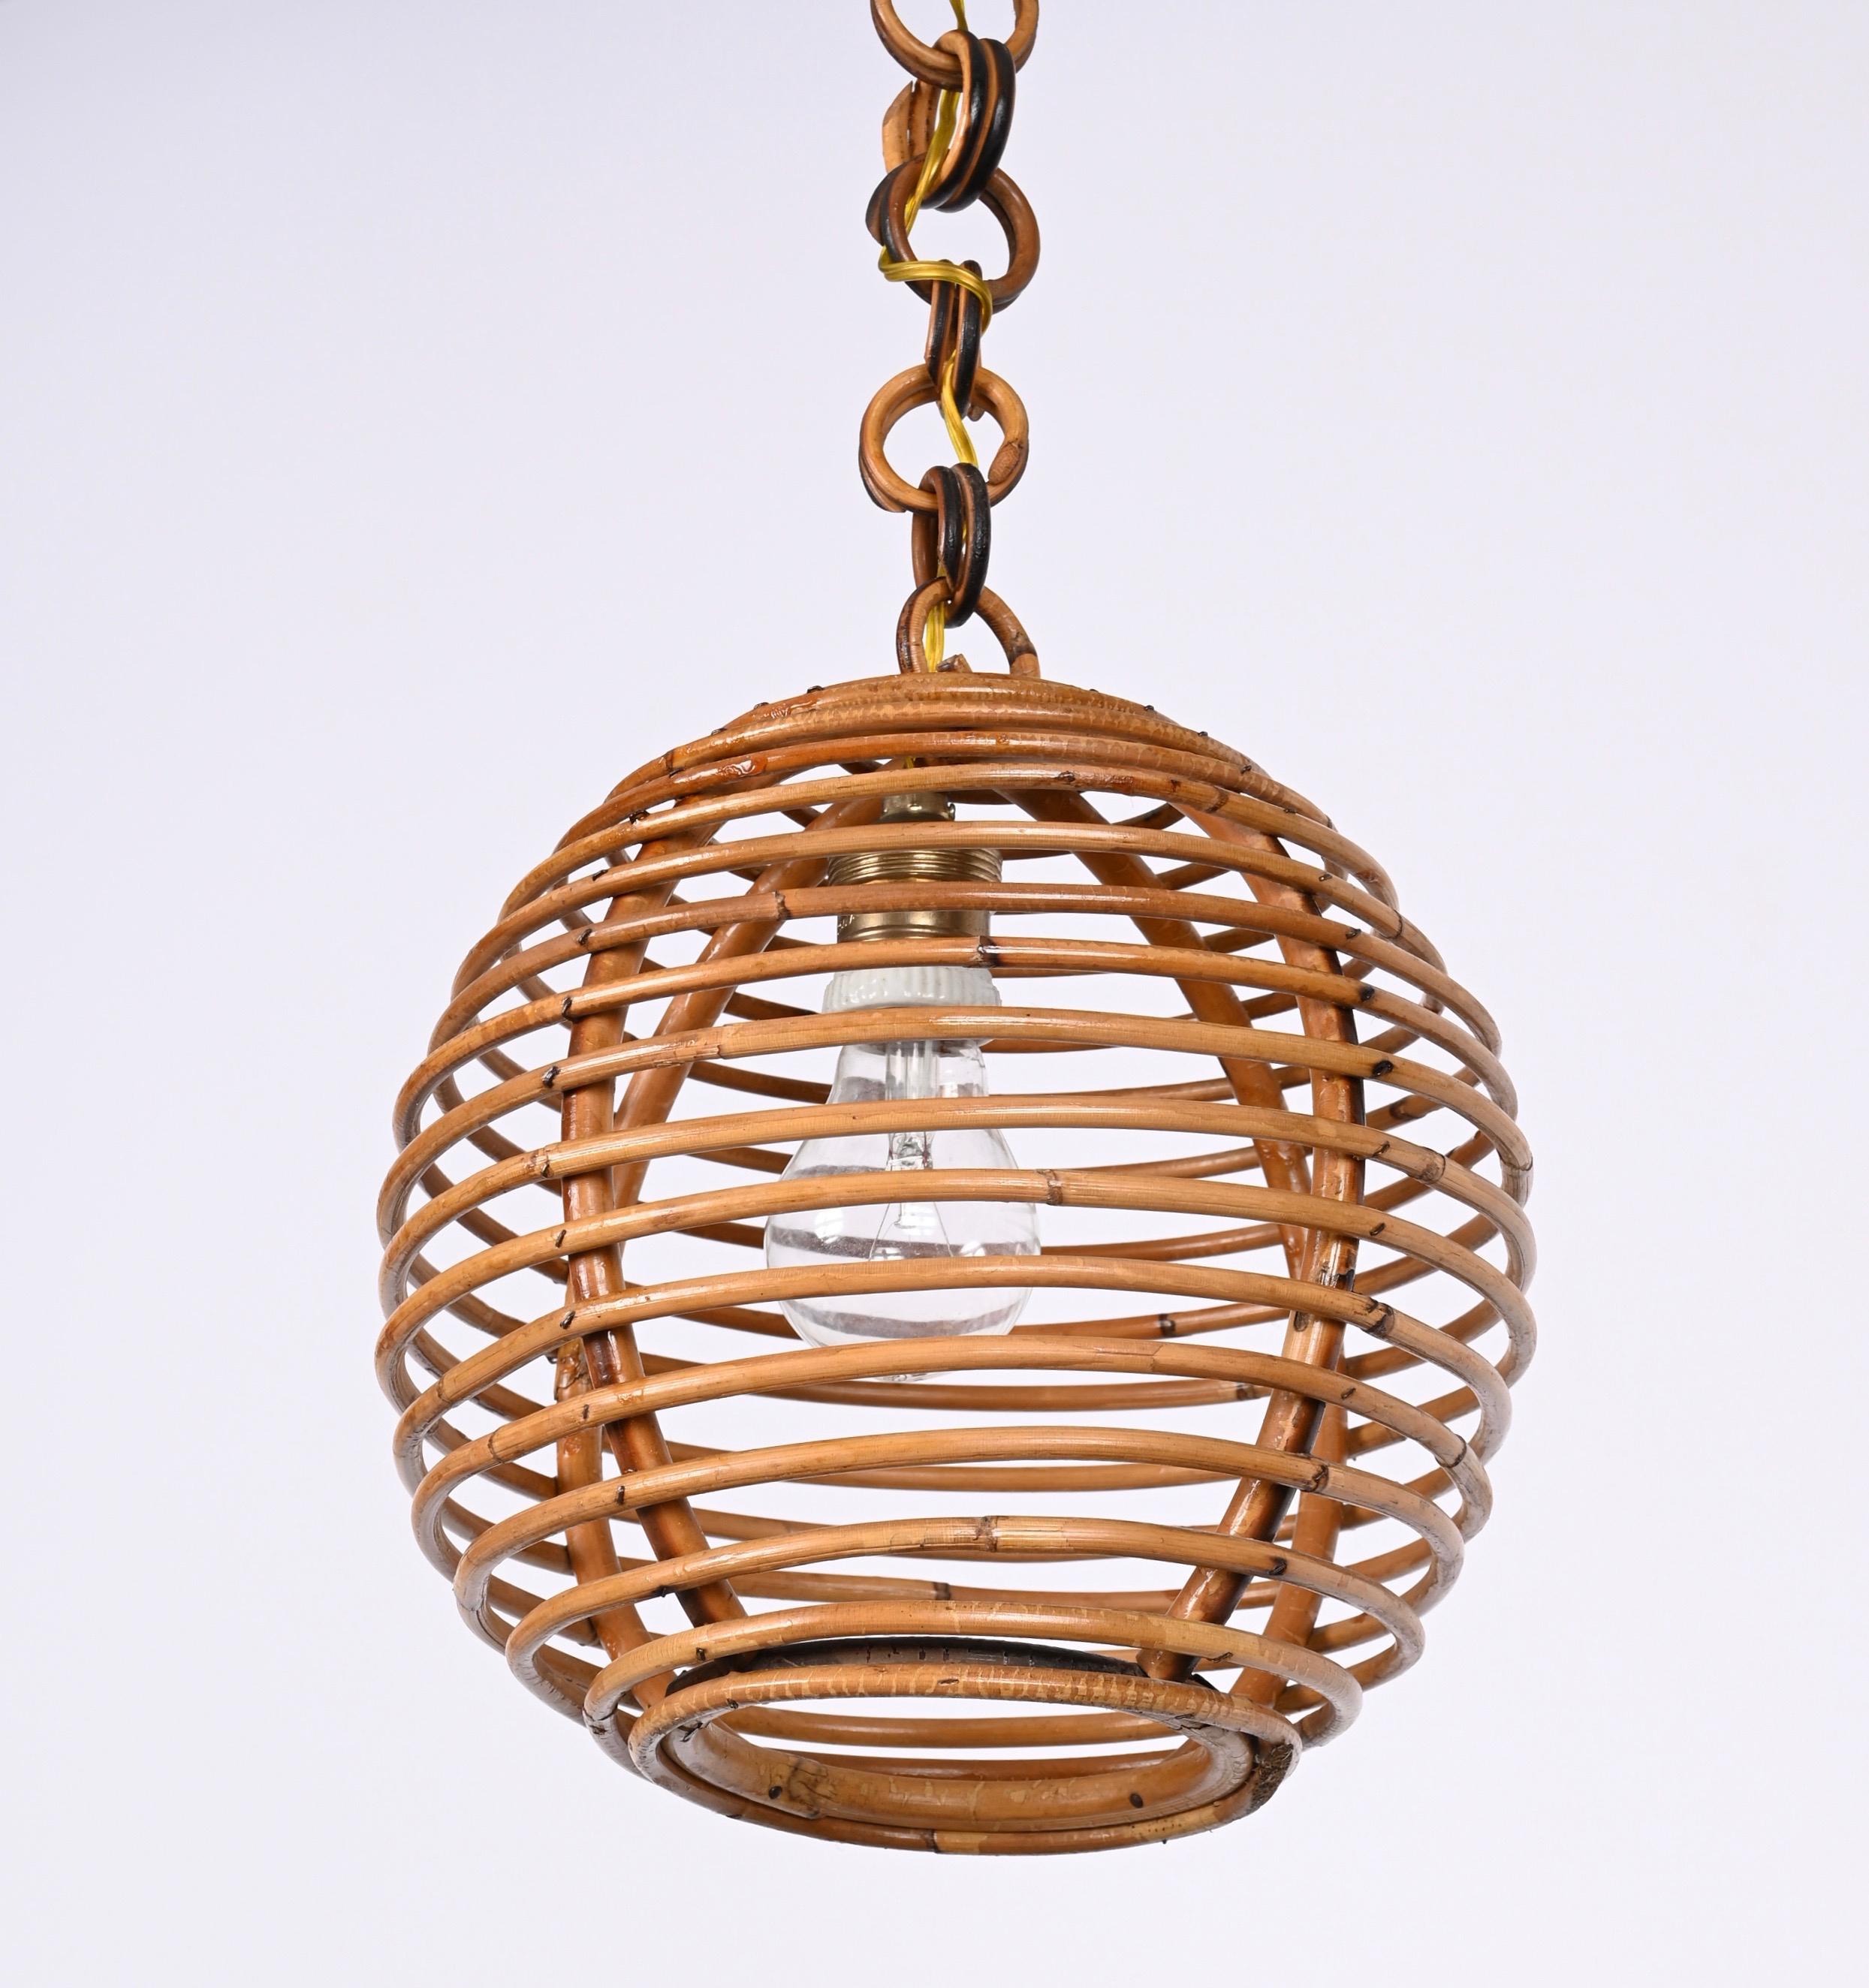 Midcentury French Riviera Bambo and Rattan Spherical Italian Chandelier, 1960s For Sale 14